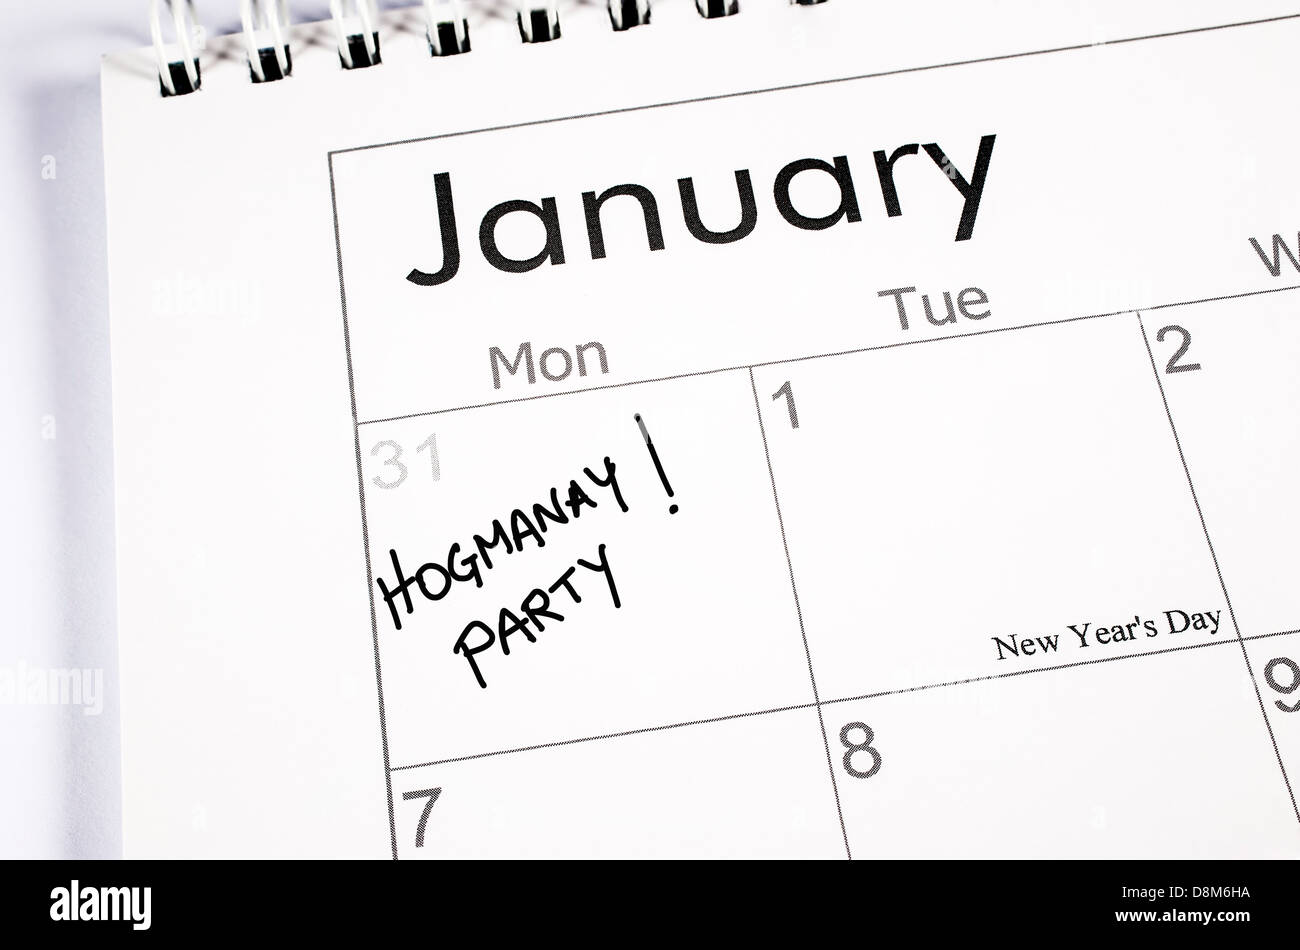 Calendar page with New Year's Eve noted with the words Hogmanay party written in the date space Stock Photo